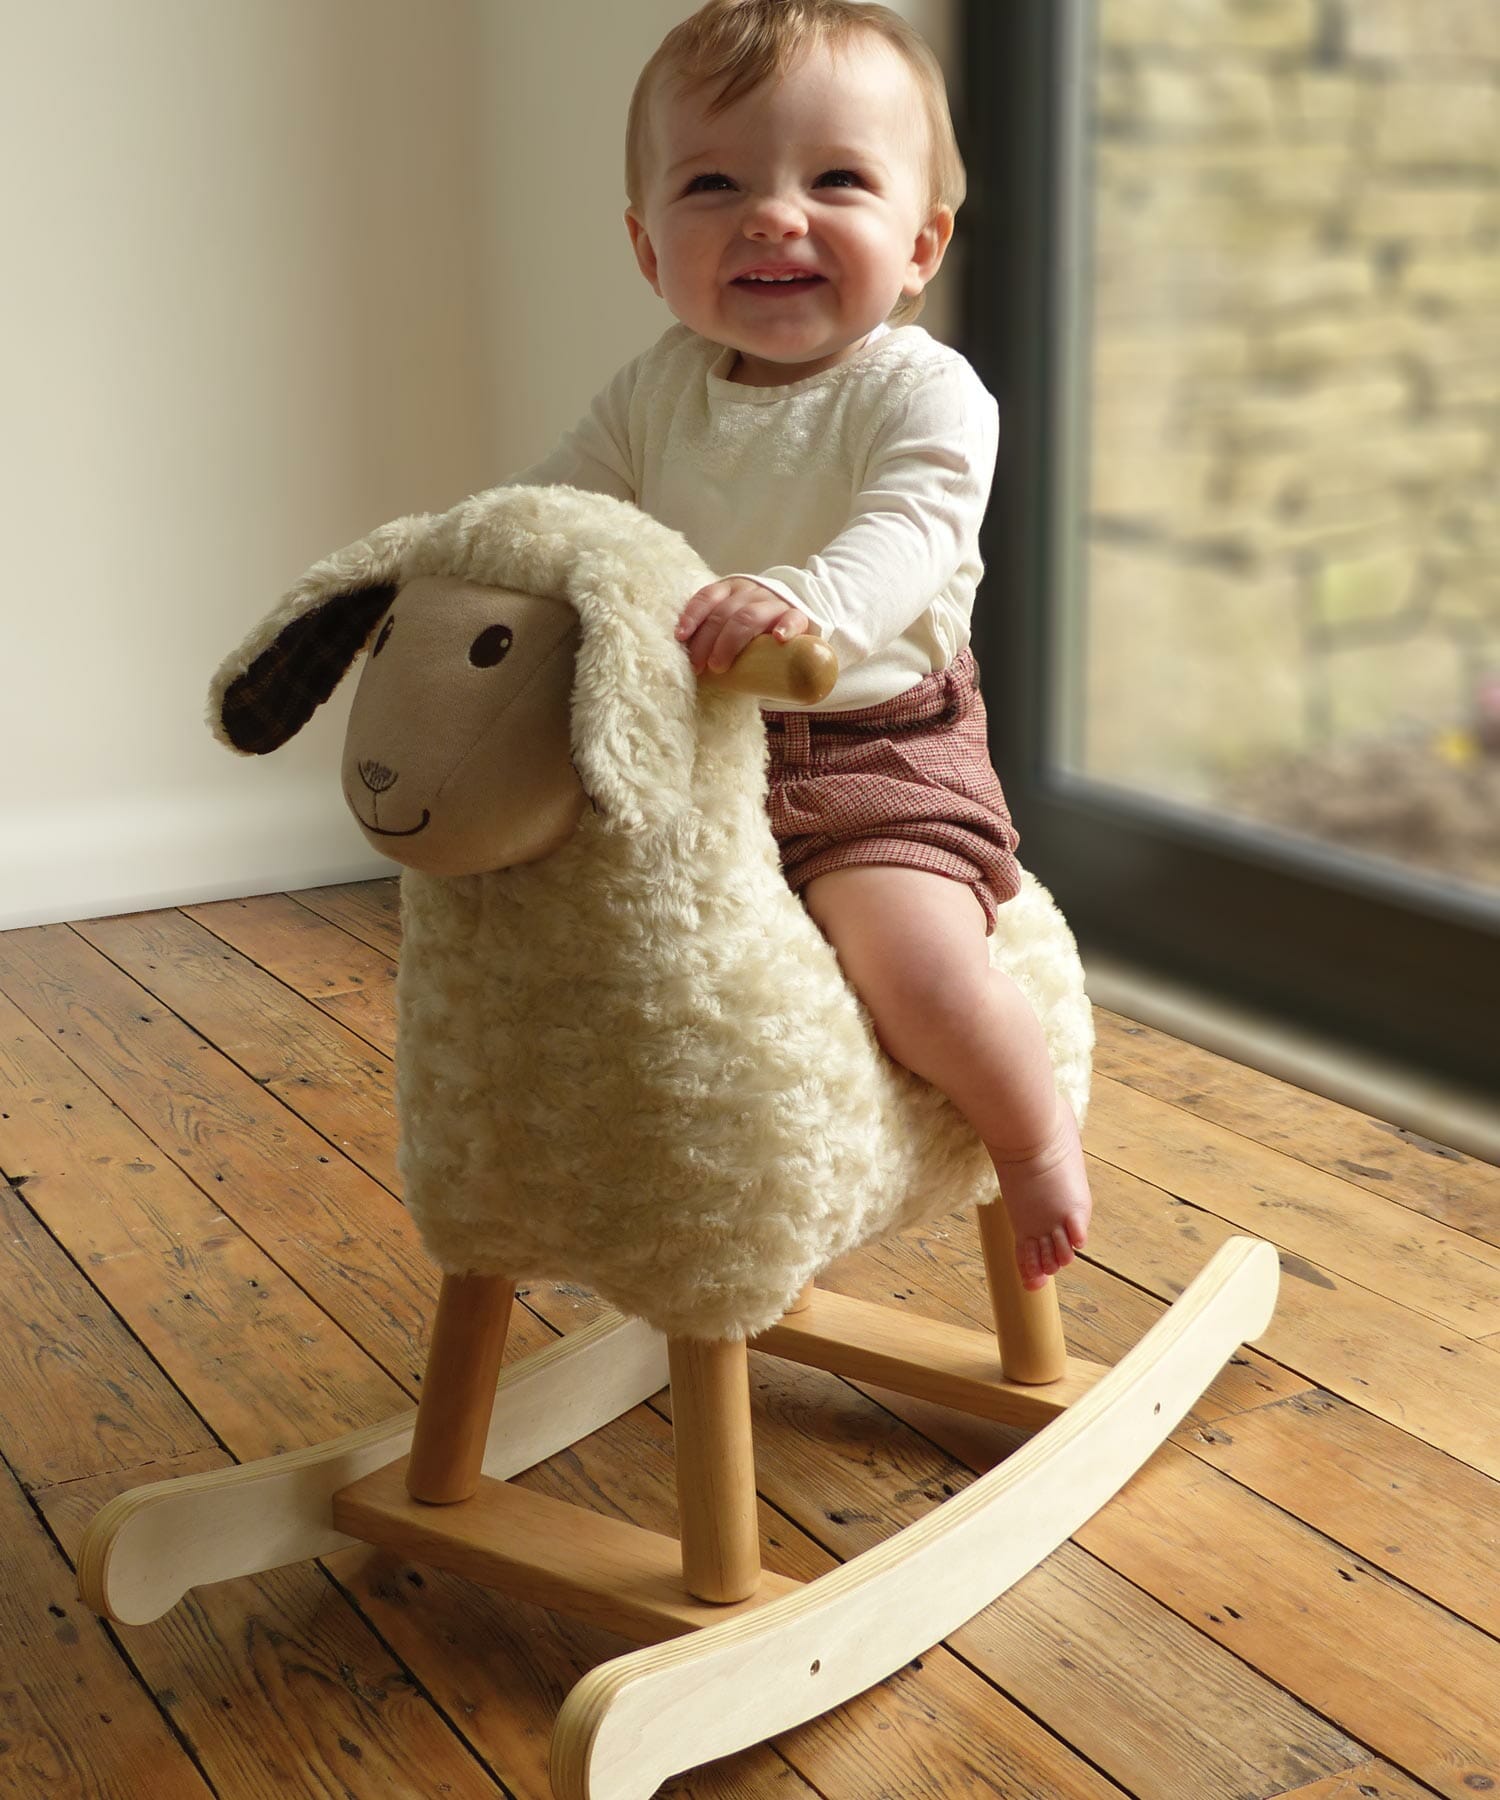 Toddler riding on Lambert Rocking Sheep with sturdy wooden frame